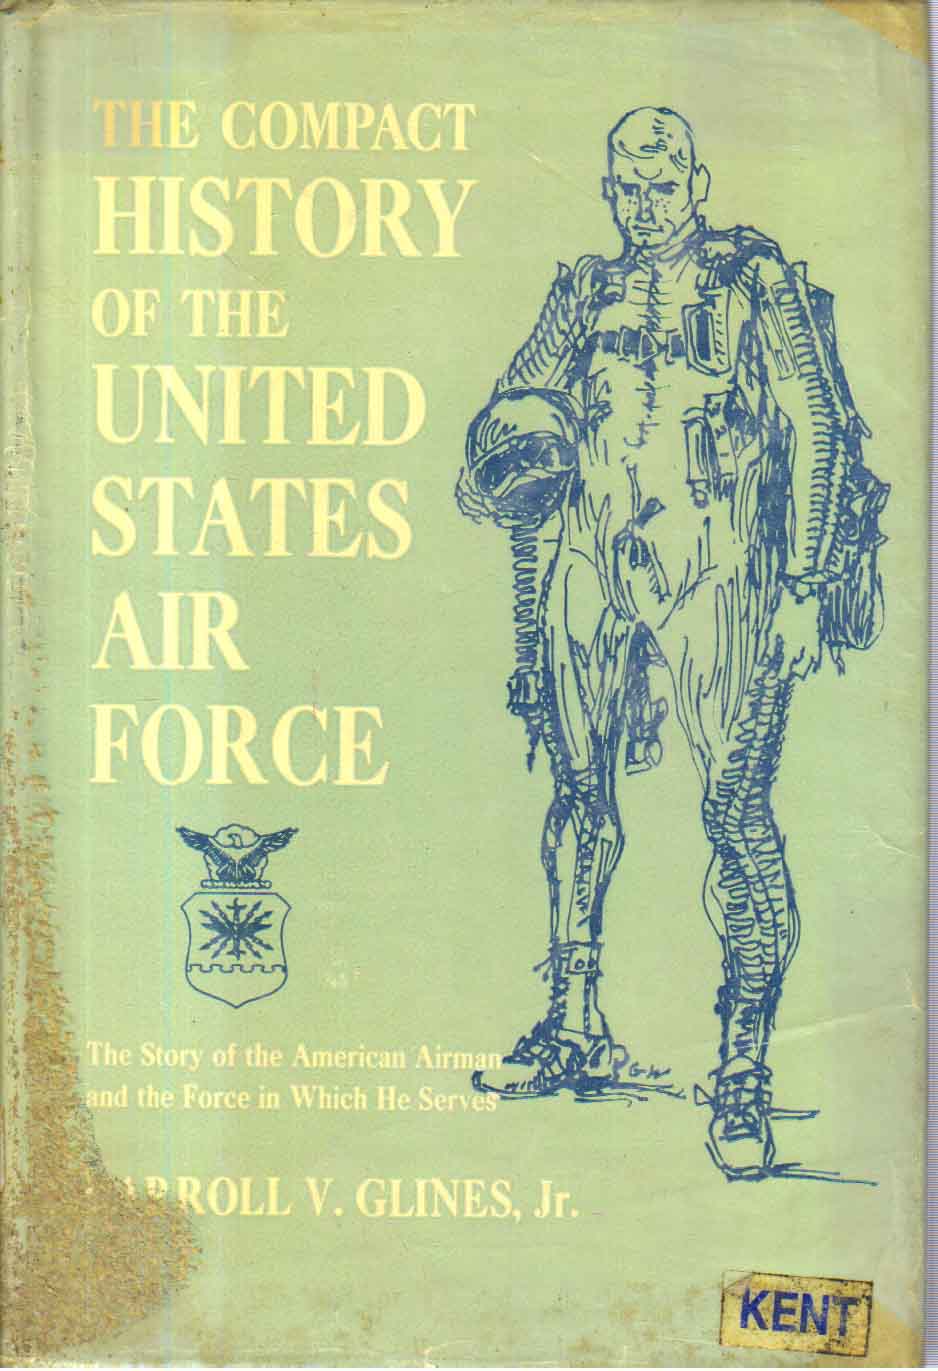 The Compact History of the United States Air Force